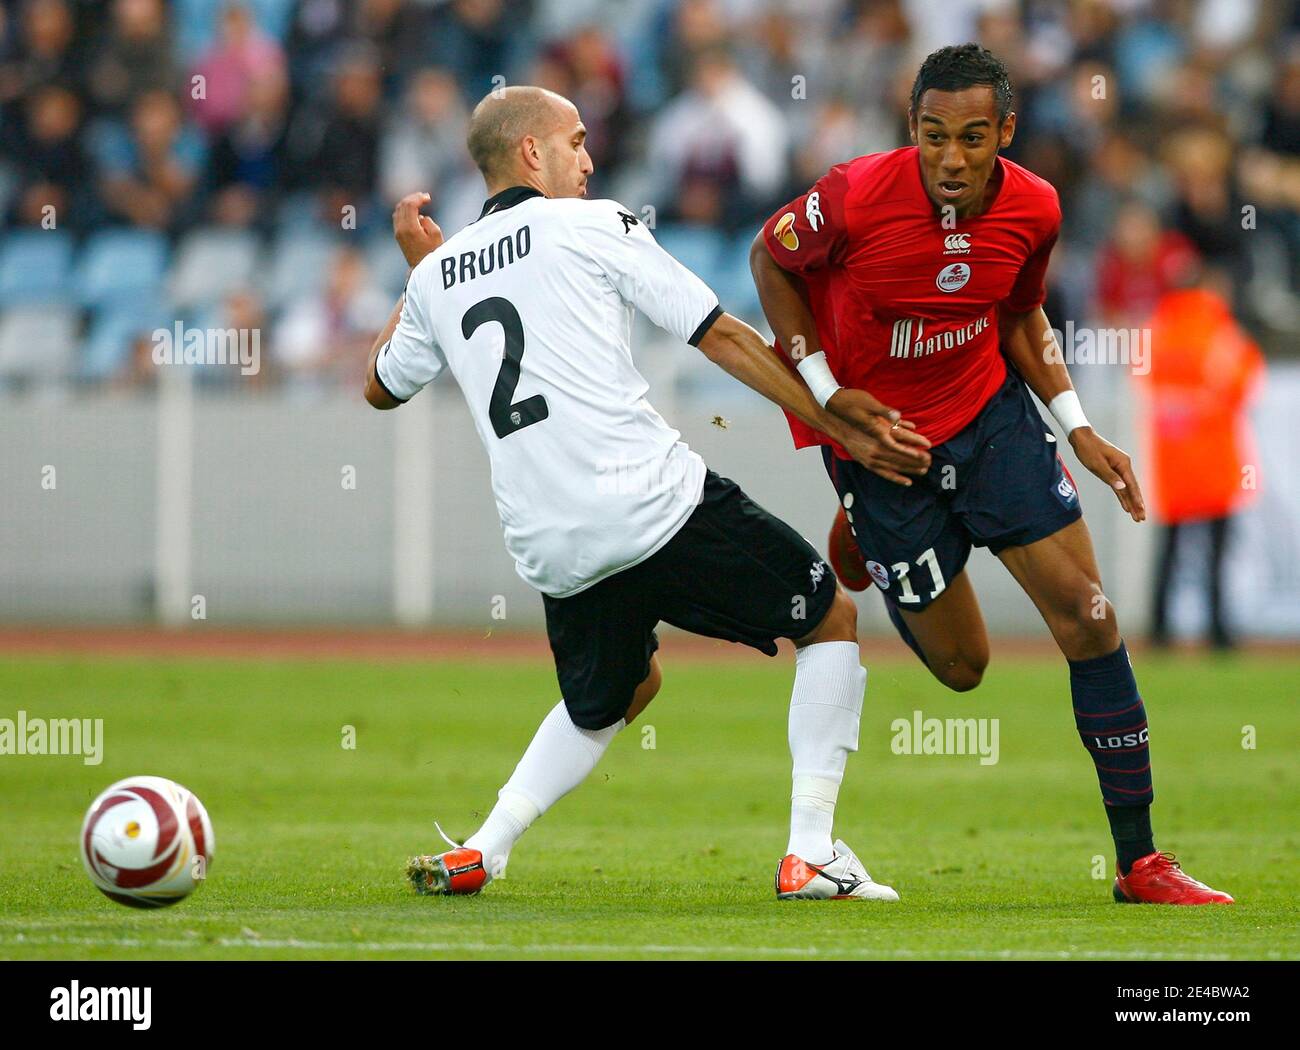 Lille's Pierre-Emerick Aubameyang fights for the ball with Valence's Bruno Saltore during the europa league soccer match between french team Lille (LOSC) and spanish team Valence CF at Lille Metropole Stadium in Lille, France on September 17, 2009. The ma Stock Photo